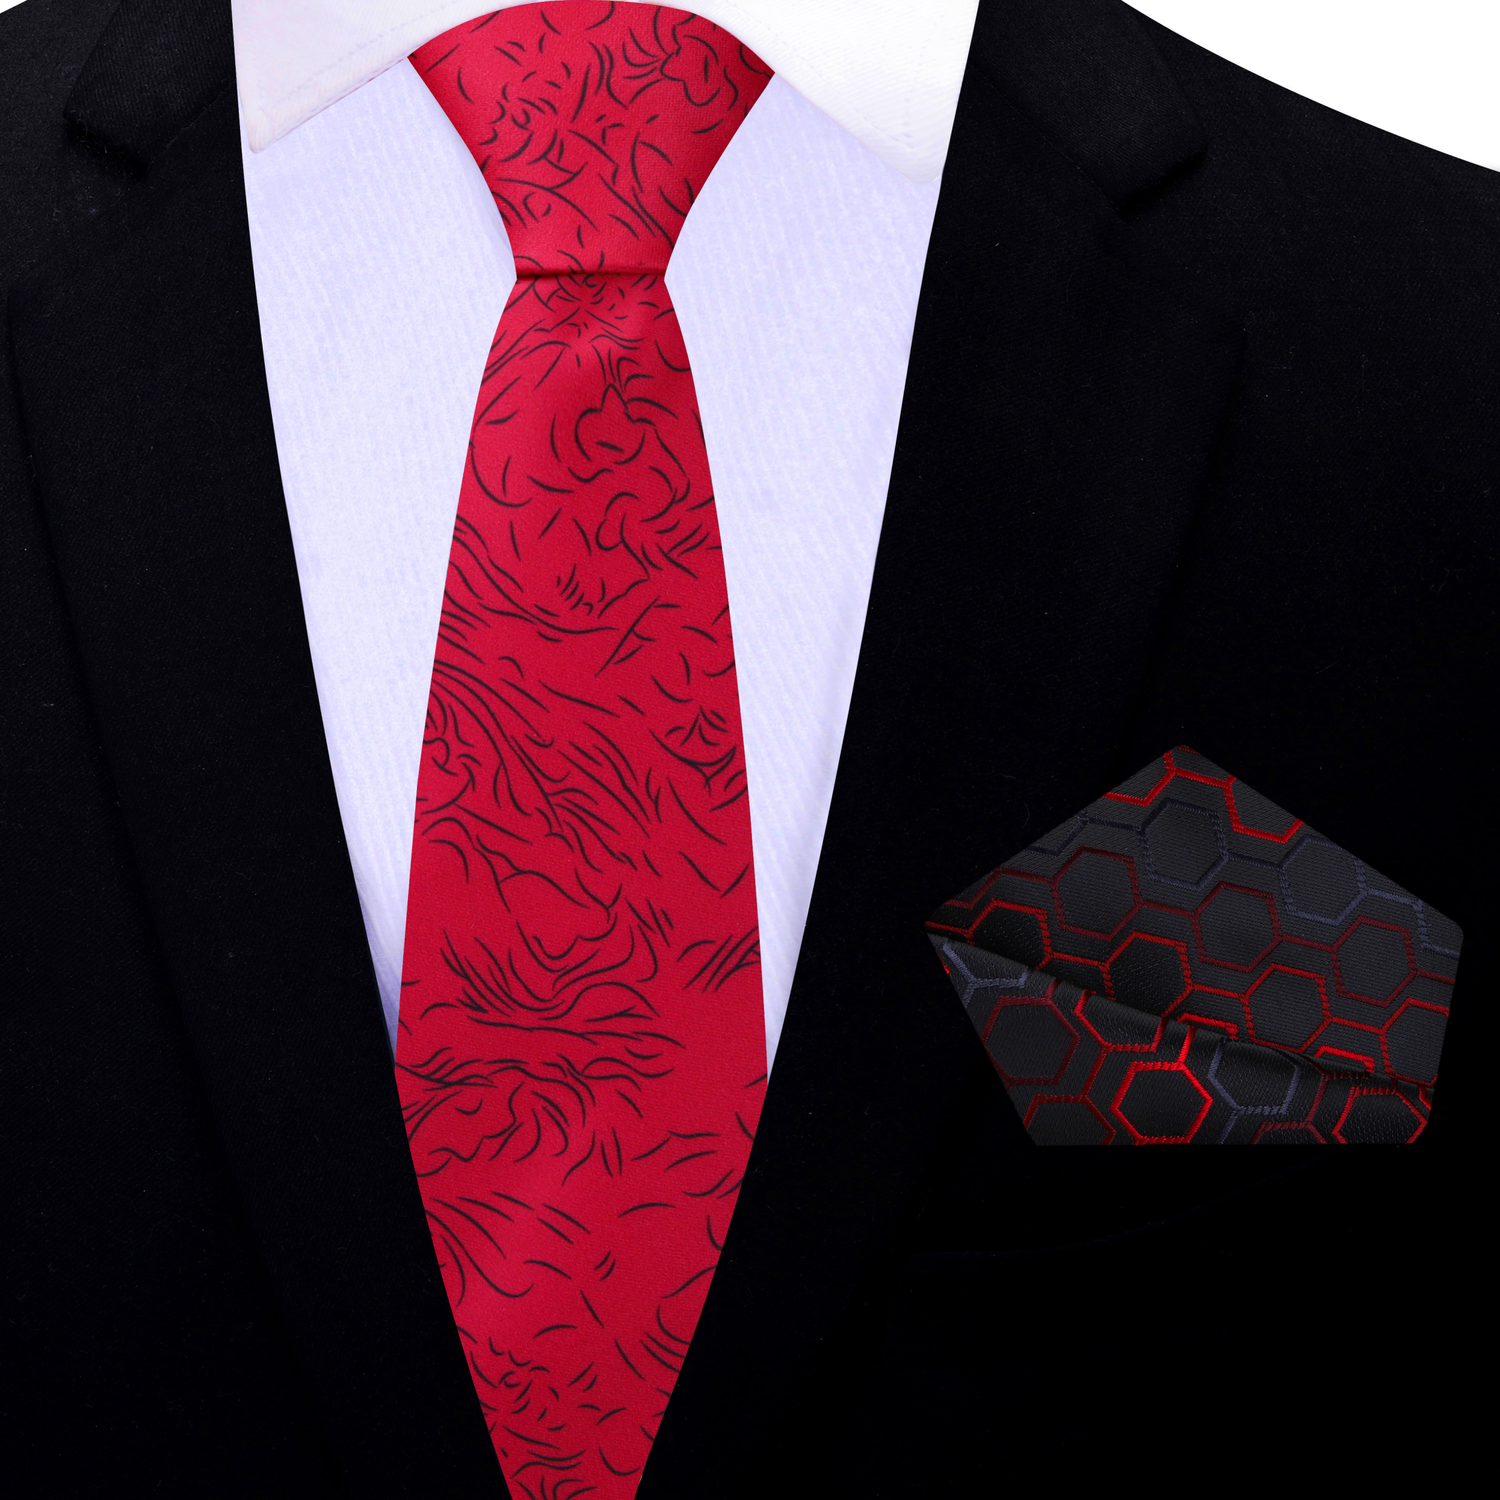 Thin Tie: Bright Red and Black Abstract Lines Tie and Black and Red Geometric Square